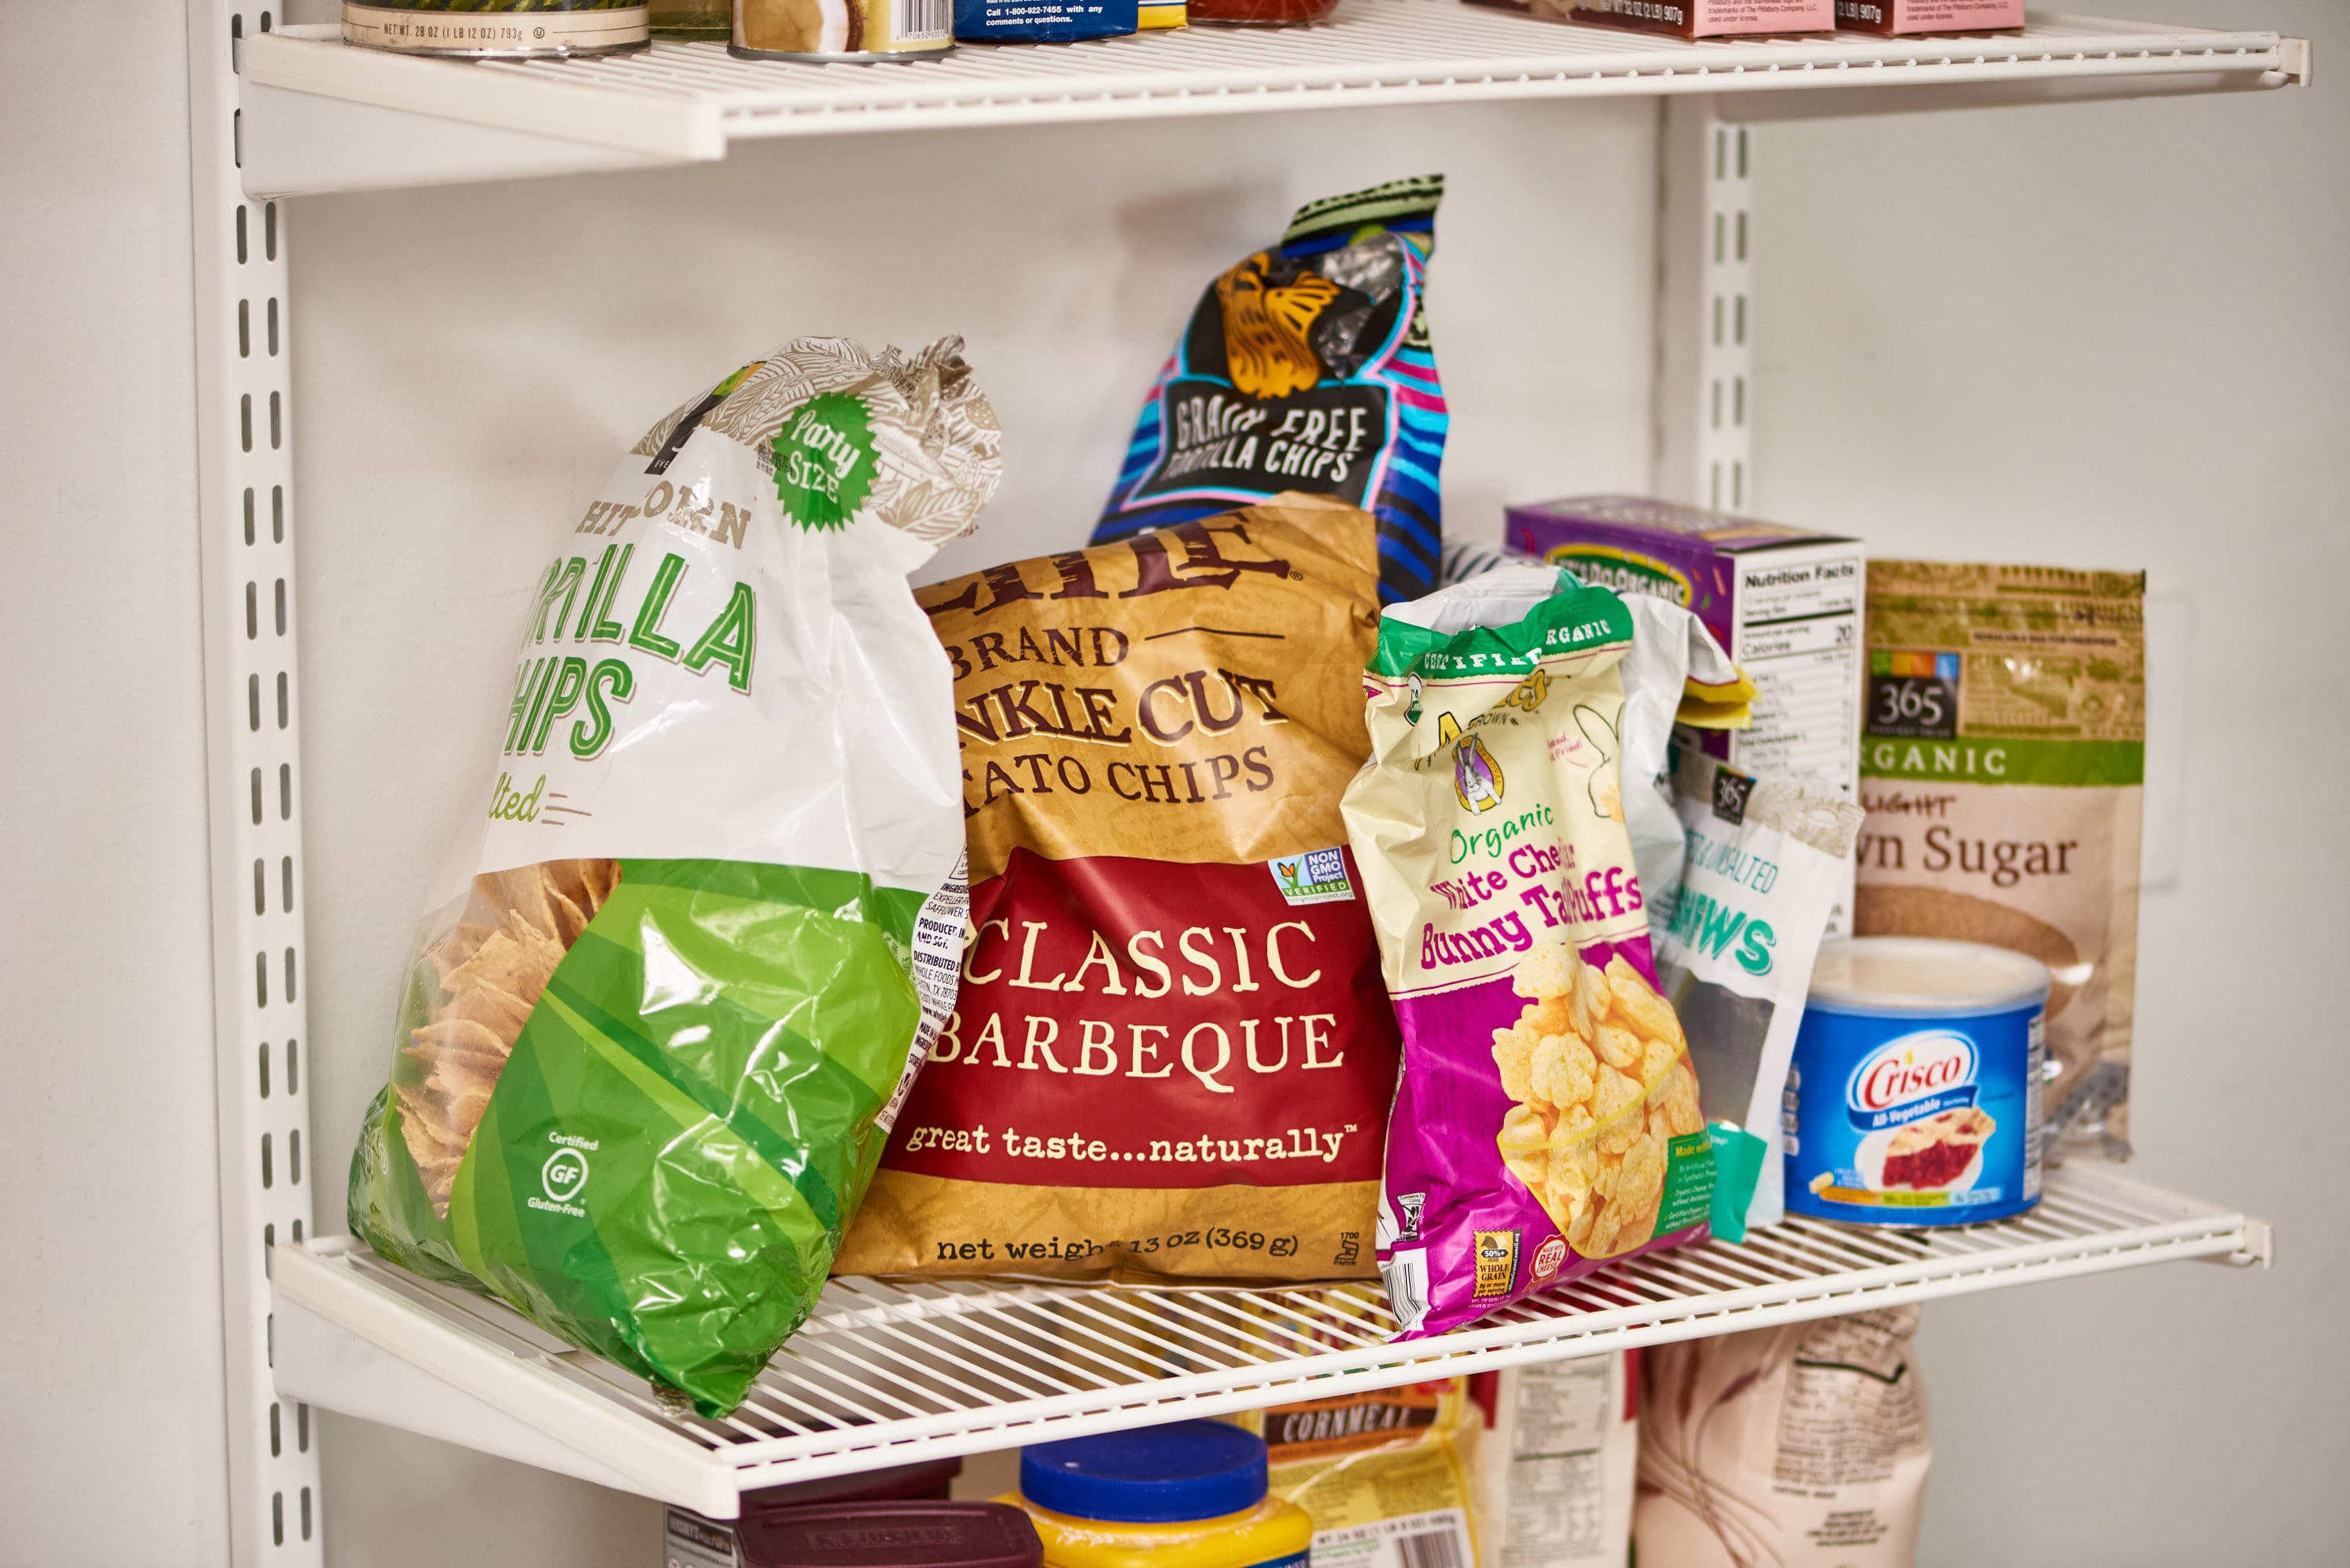 https://cdn.apartmenttherapy.info/image/upload/v1566507694/k/Photo/Lifestyle/2019-09-you-should-keep-plastic-pants-hangers-in-your-pantry/You-Should-Keep-Plastic-Pants-Hangers-in-Your-Pantry_053.jpg